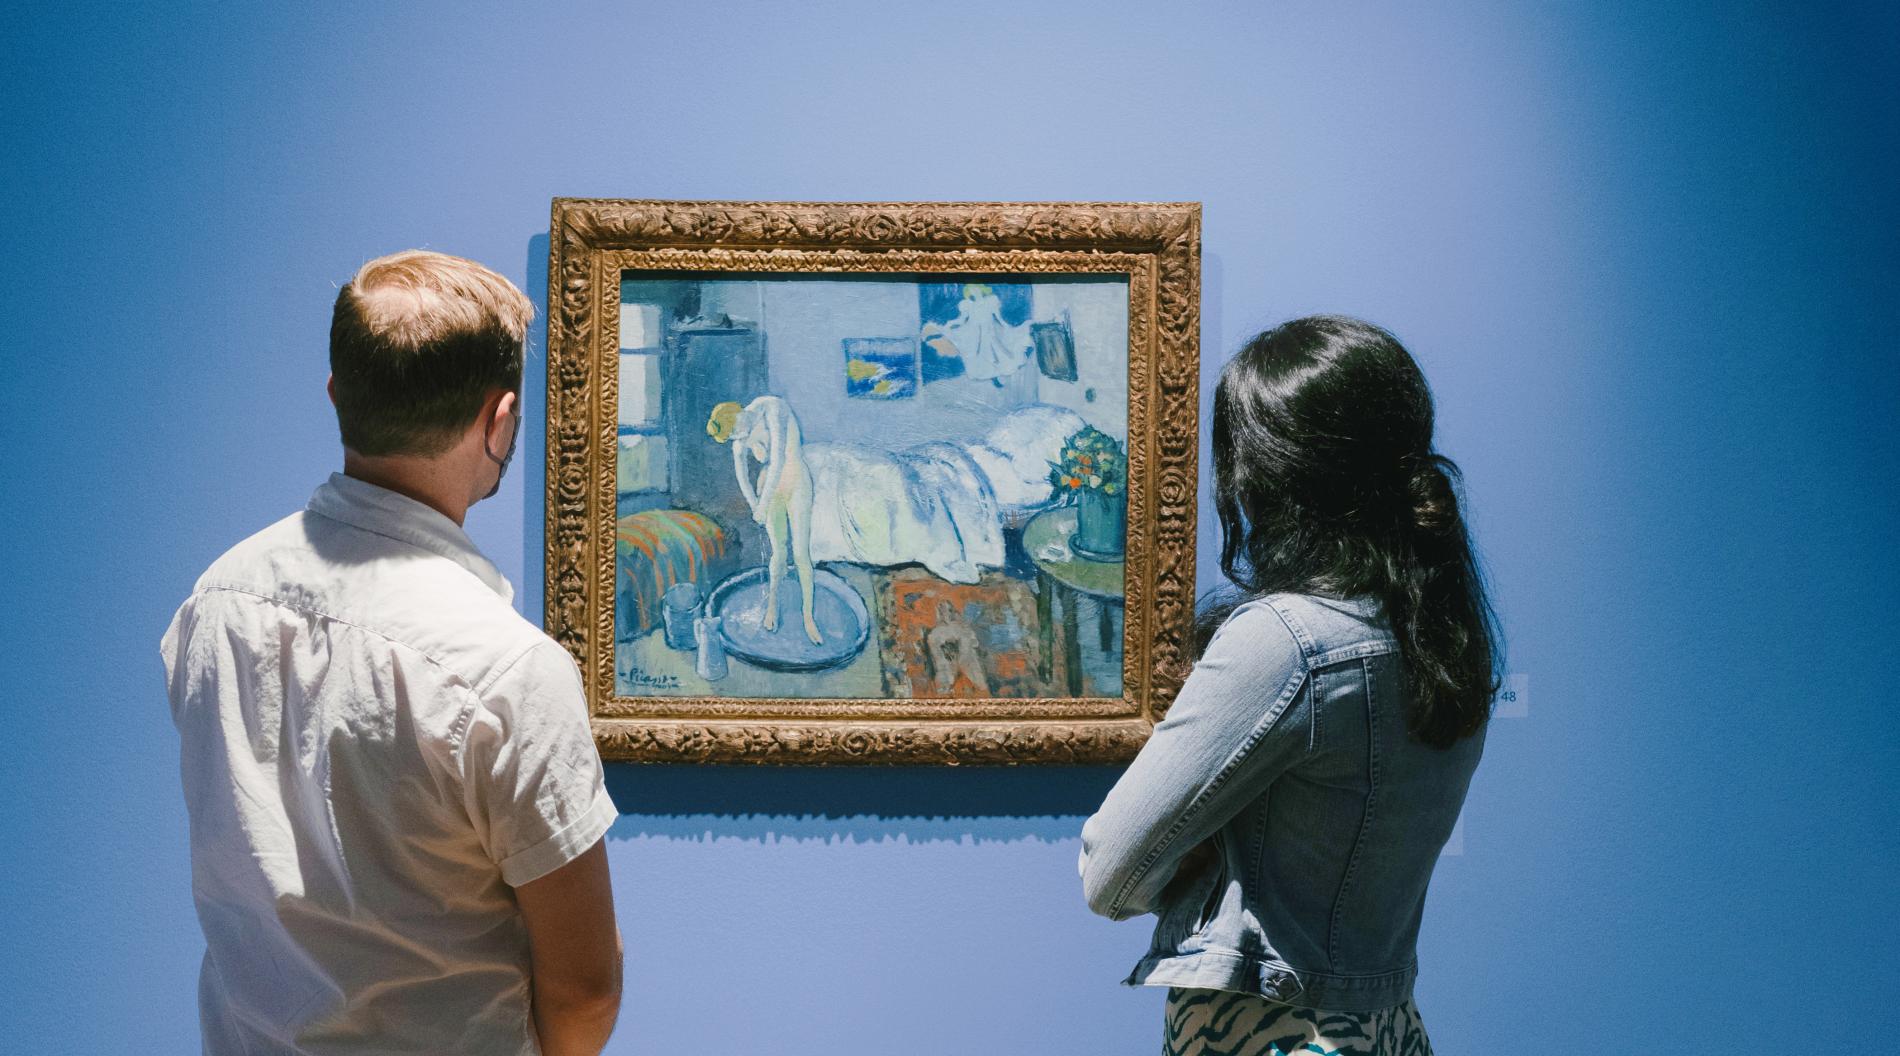 Photograph of two people looking at Picasso's The Blue Room